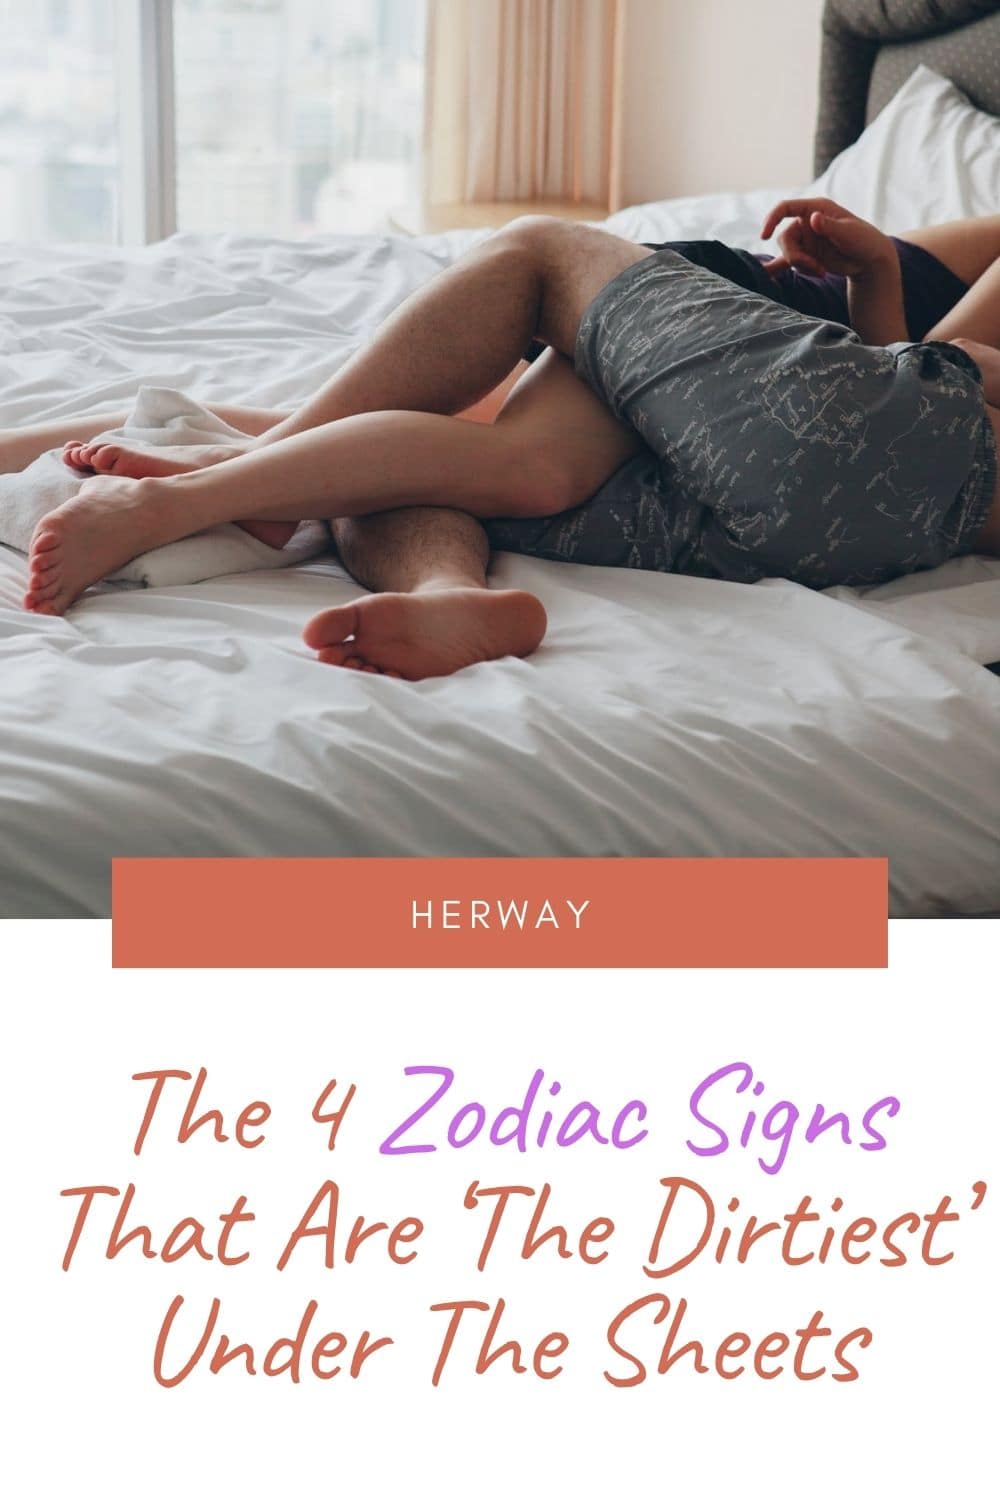 The 4 Zodiac Signs That Are ‘The Dirtiest’ Under The Sheets